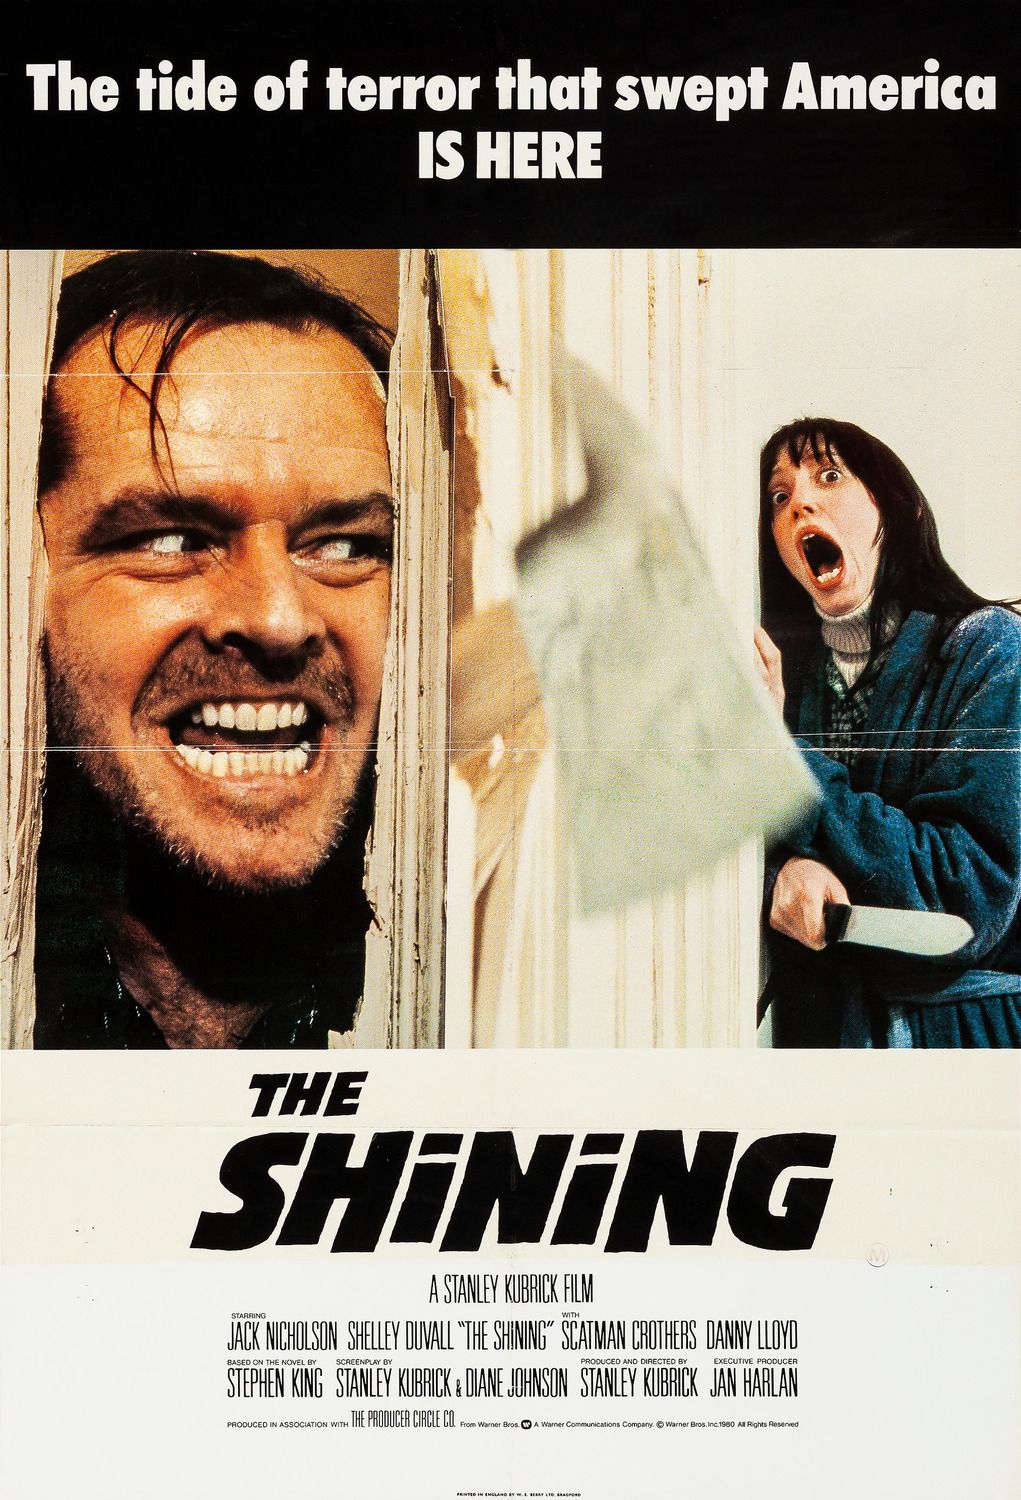 Jack Nicholson's Ax From 'The Shining' Could Fetch Up To $90,000